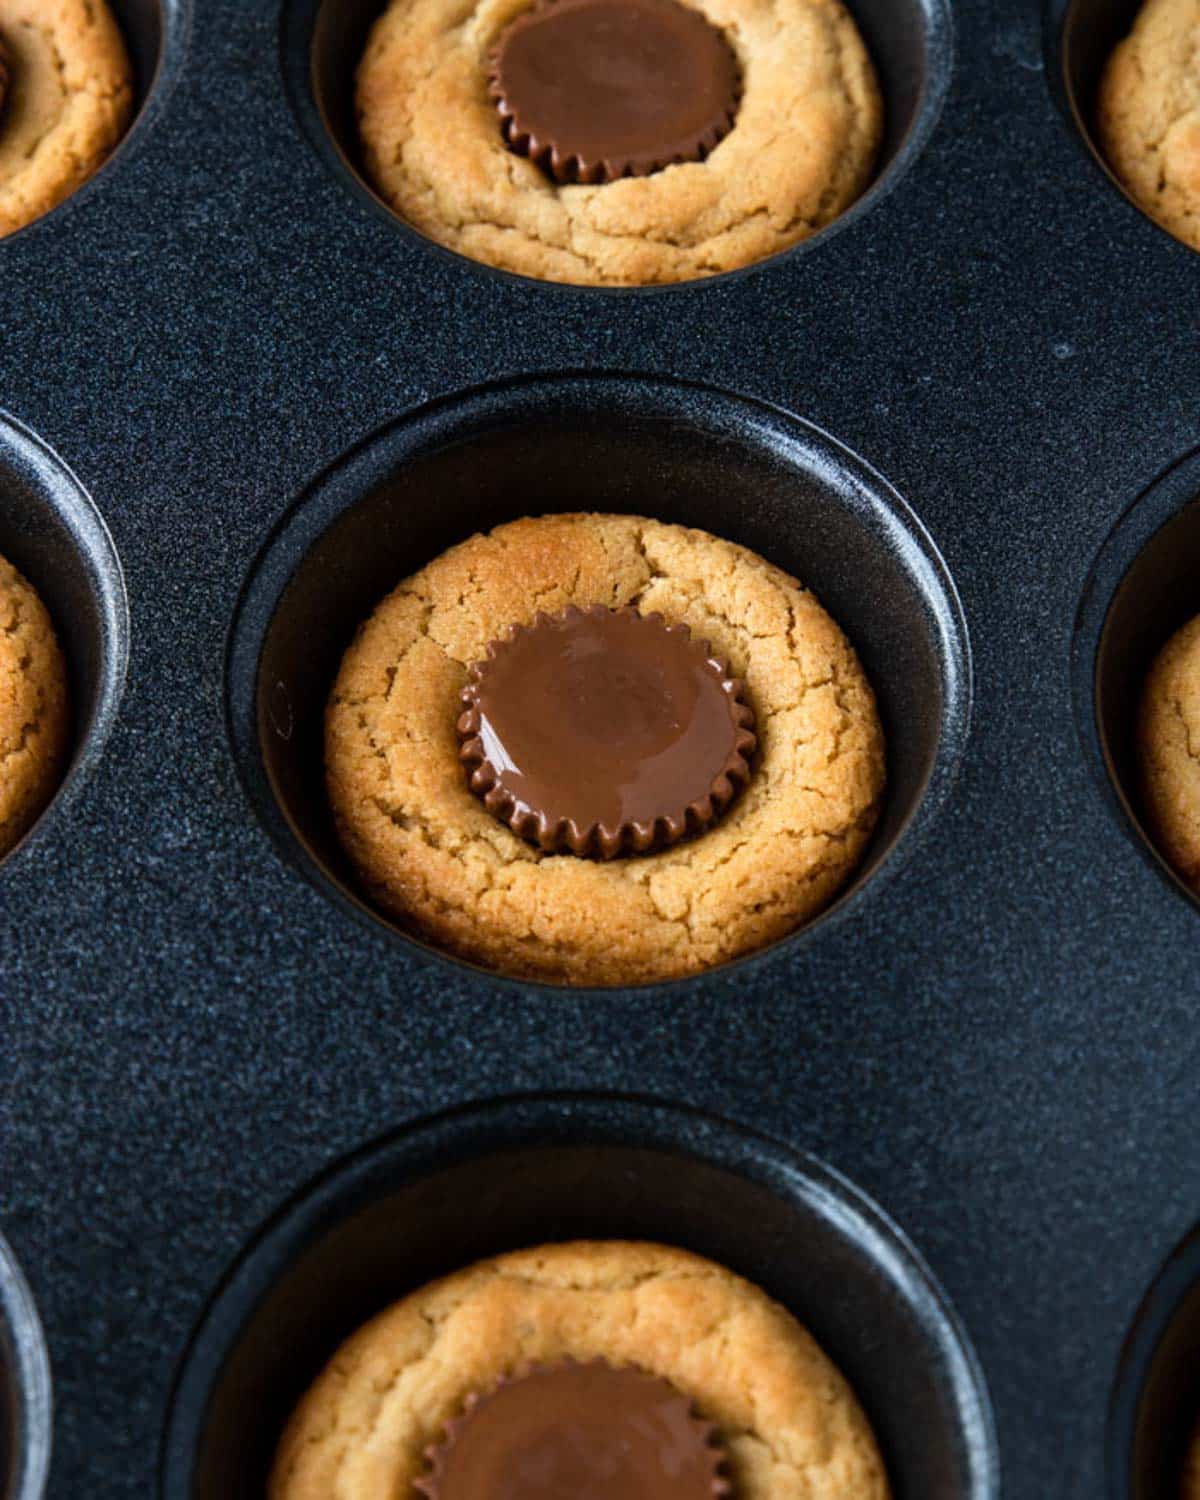 Reece's Peanut Butter Cup Cookie in a muffin tin